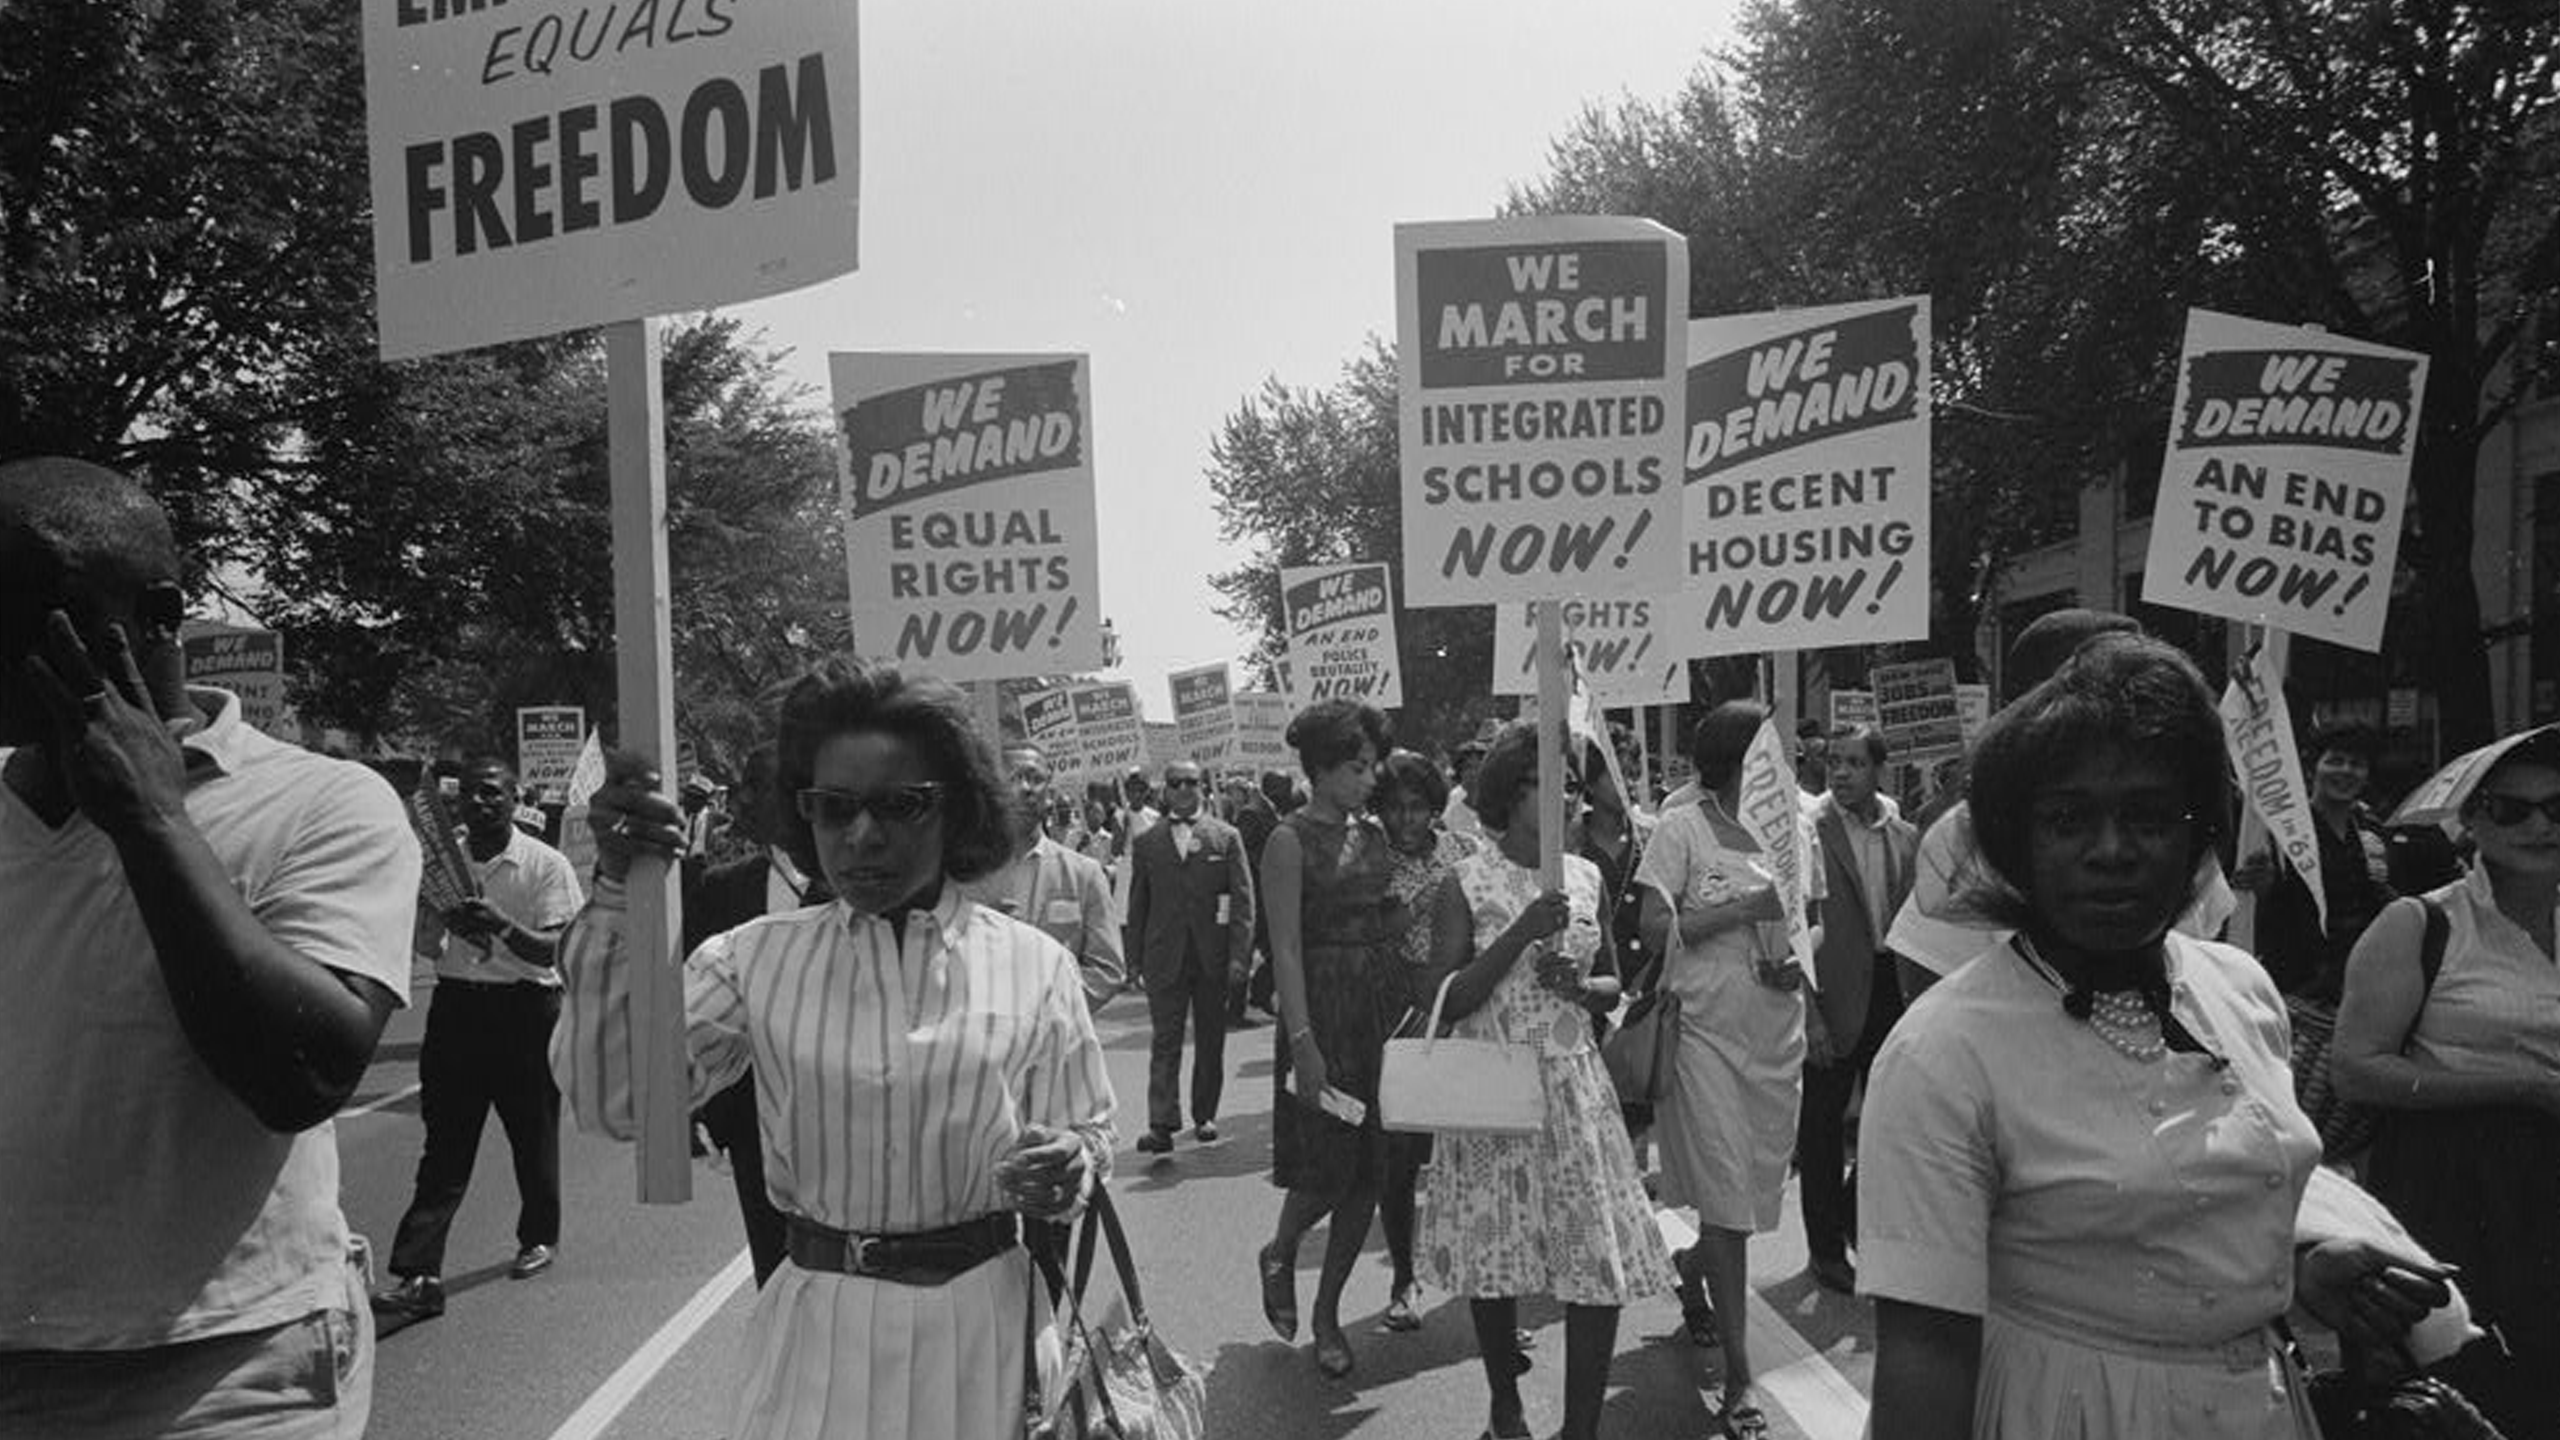 A procession of African Americans carrying signs for equal rights, integrated schools, decent housing